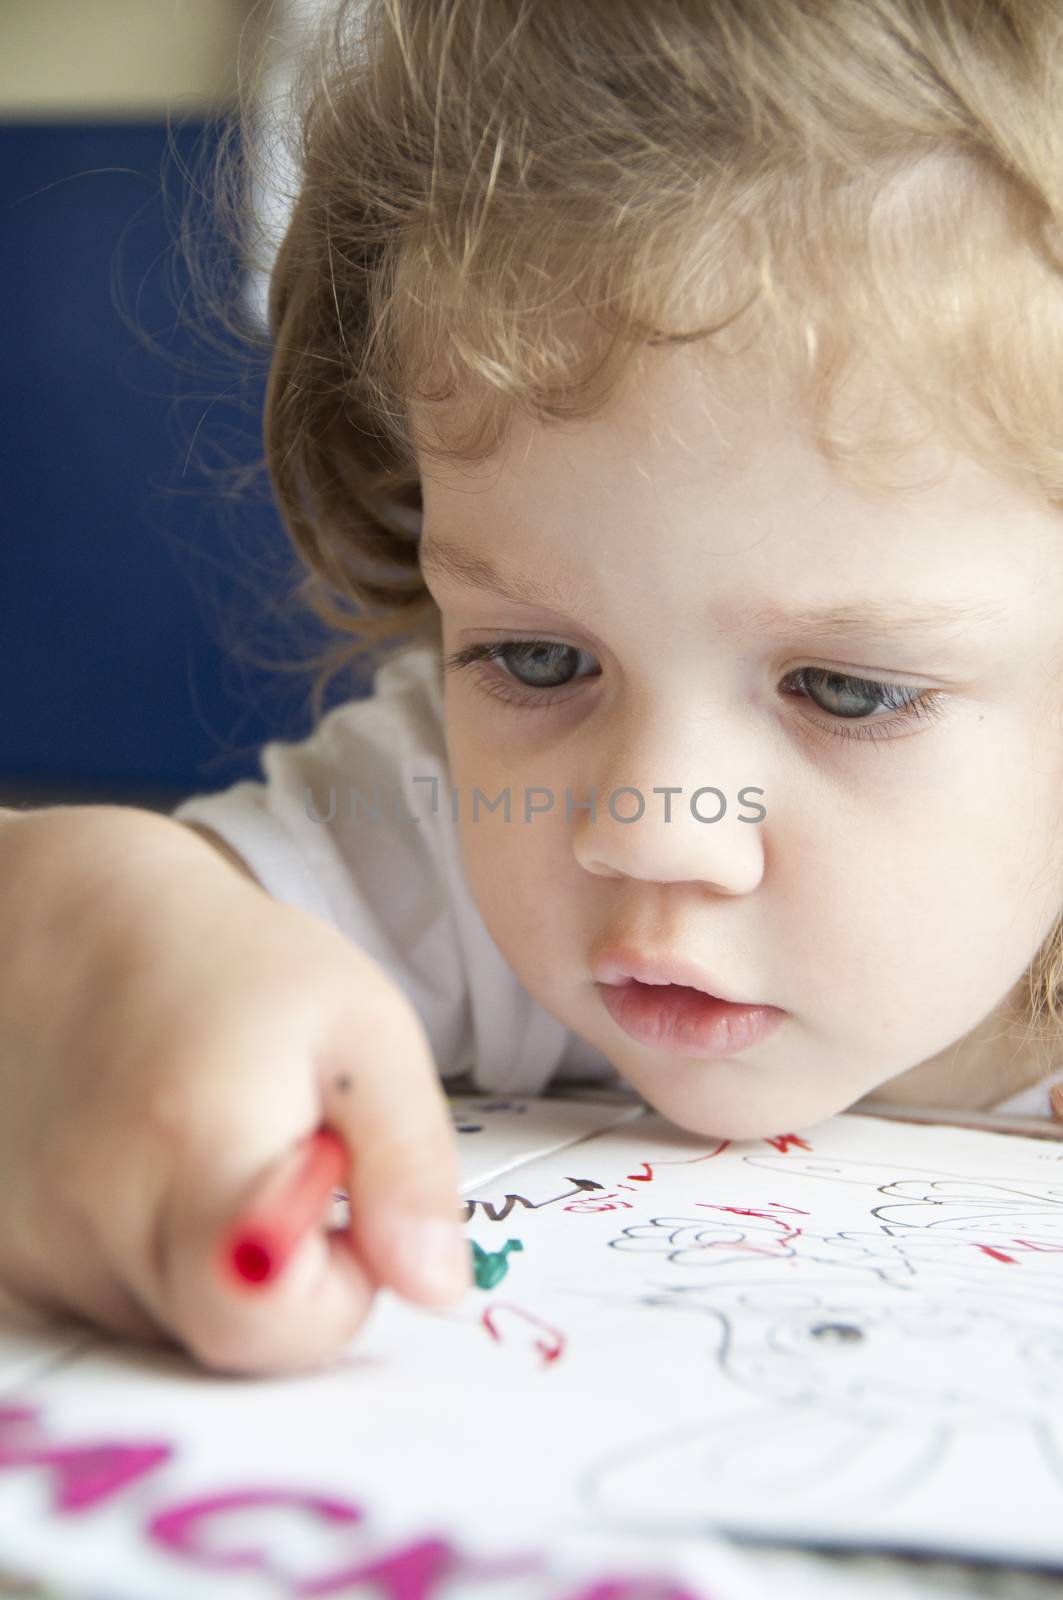 Girl draws a pencil on sheet of paper by Madhourse